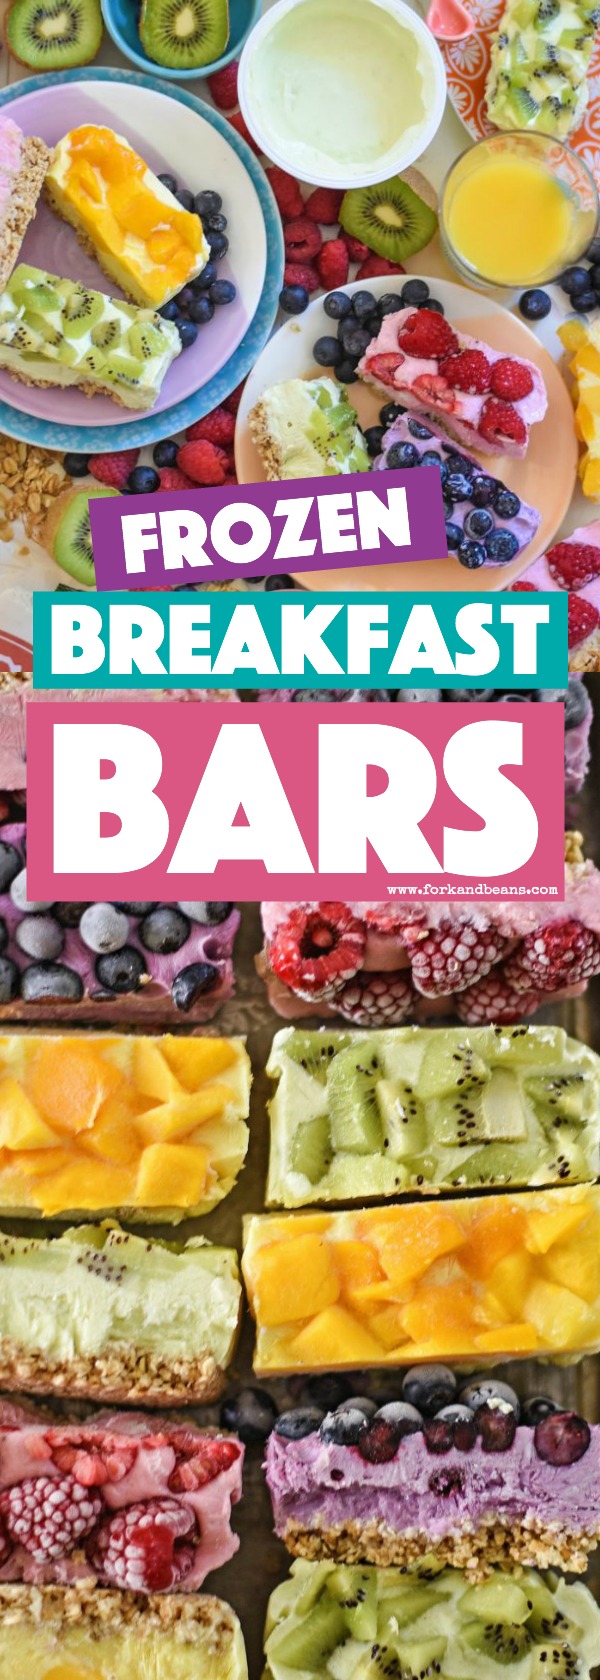 Vibrant, fresh, and healthy, these on-the-go Frozen Breakfast Bars are the busy mom's perfect meal for the road for her and her family.